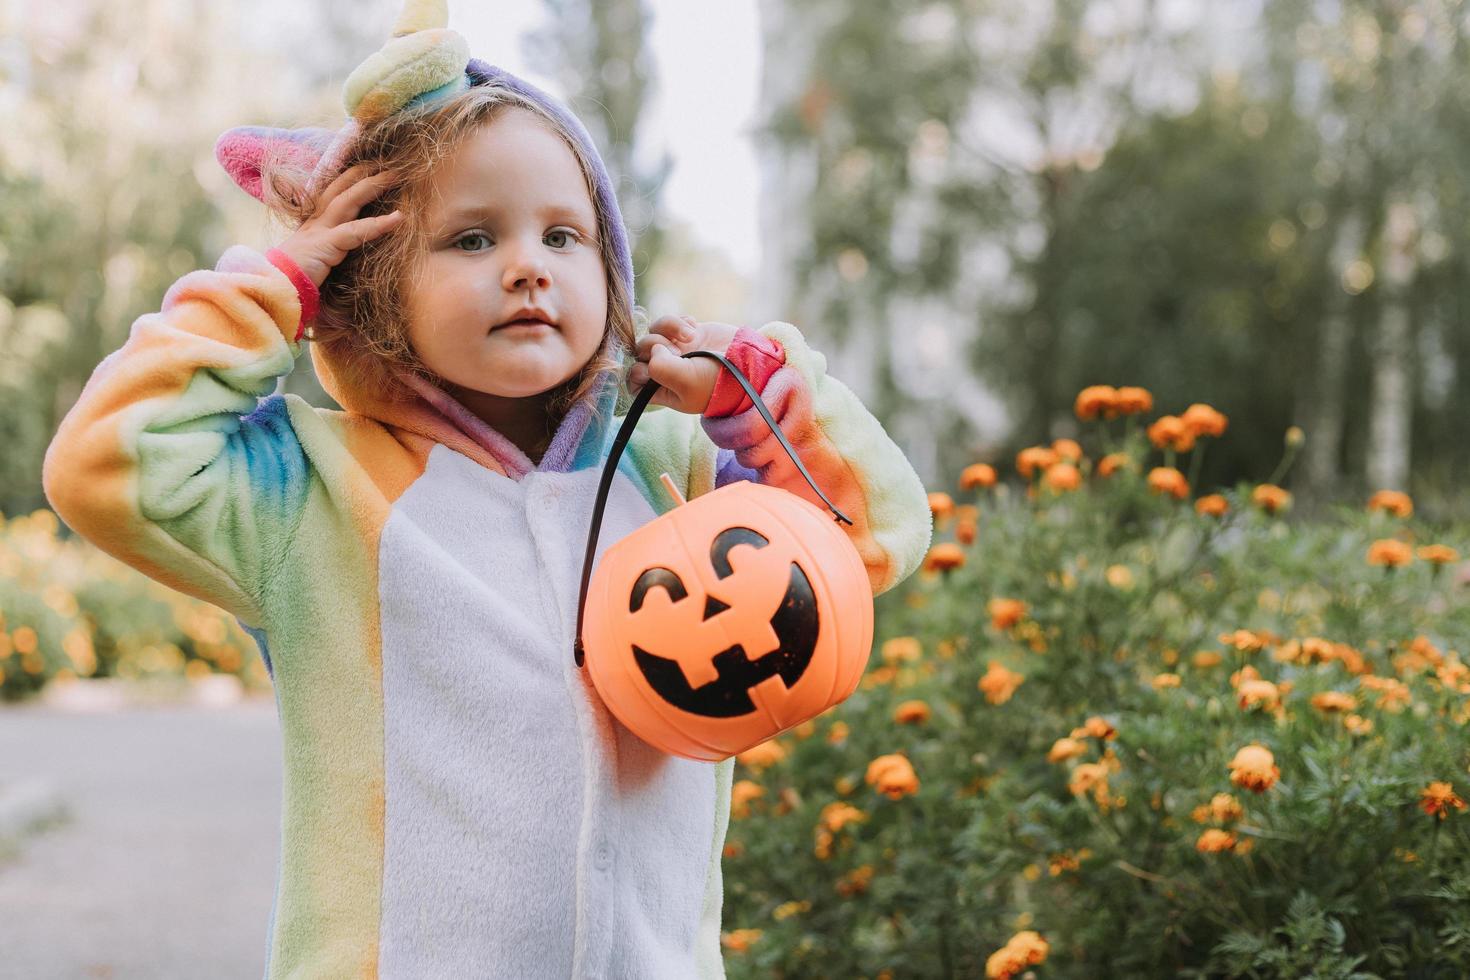 cute little girl in a rainbow unicorn costume for Halloween goes to collect sweets in a pumpkin basket in a residential area. child walks in the outdoor. trick or treat. lifestyle. kigurumi photo